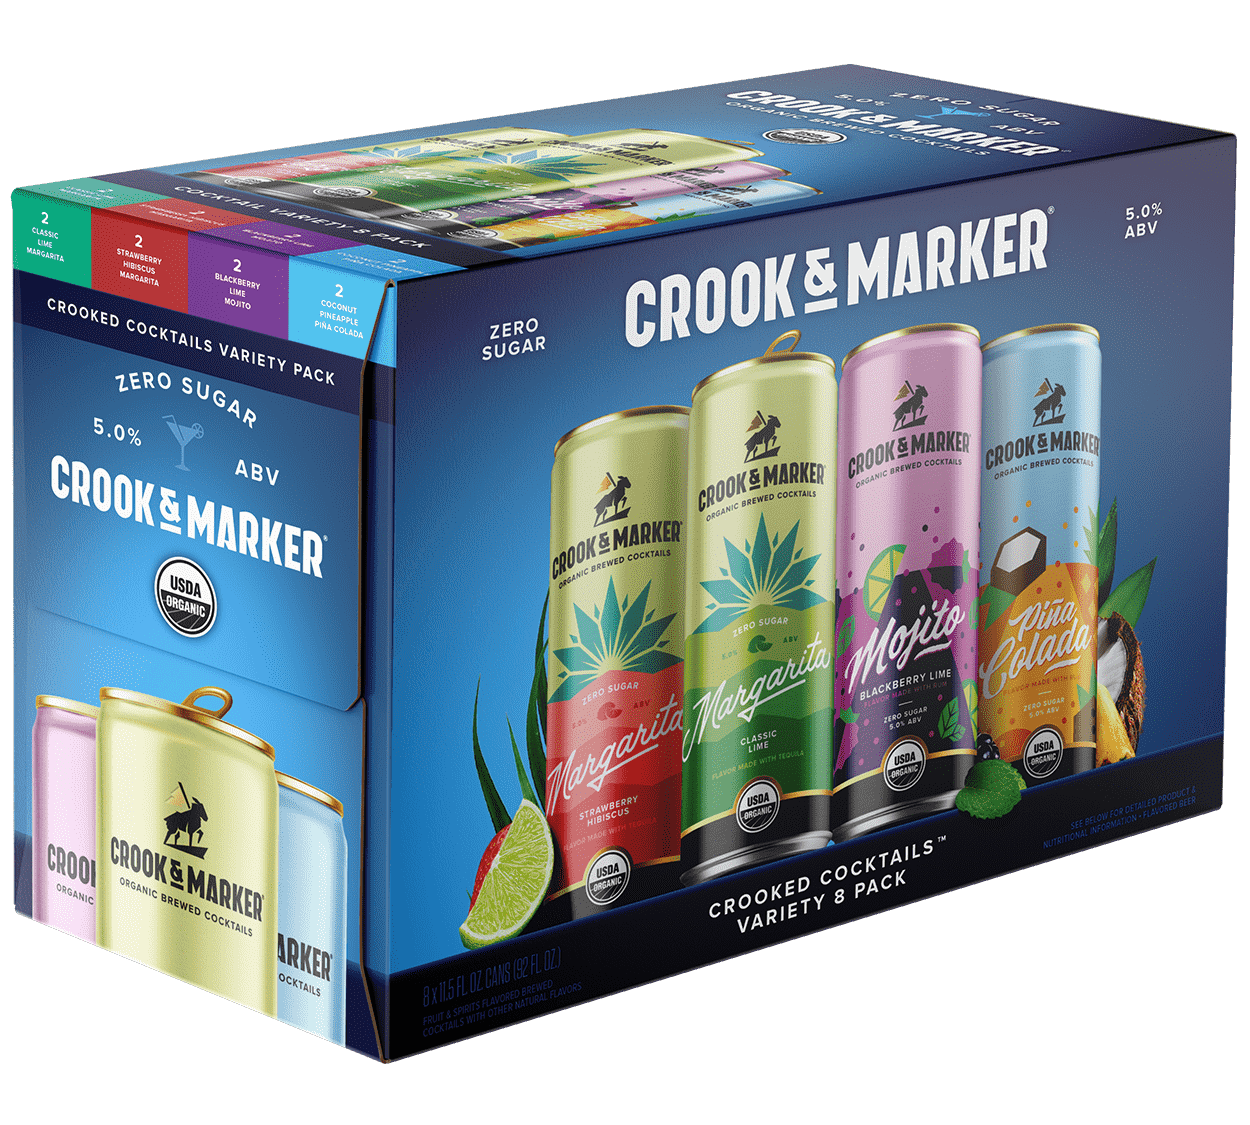 Crook & Marker Crooked Cocktails Variety Pack Box